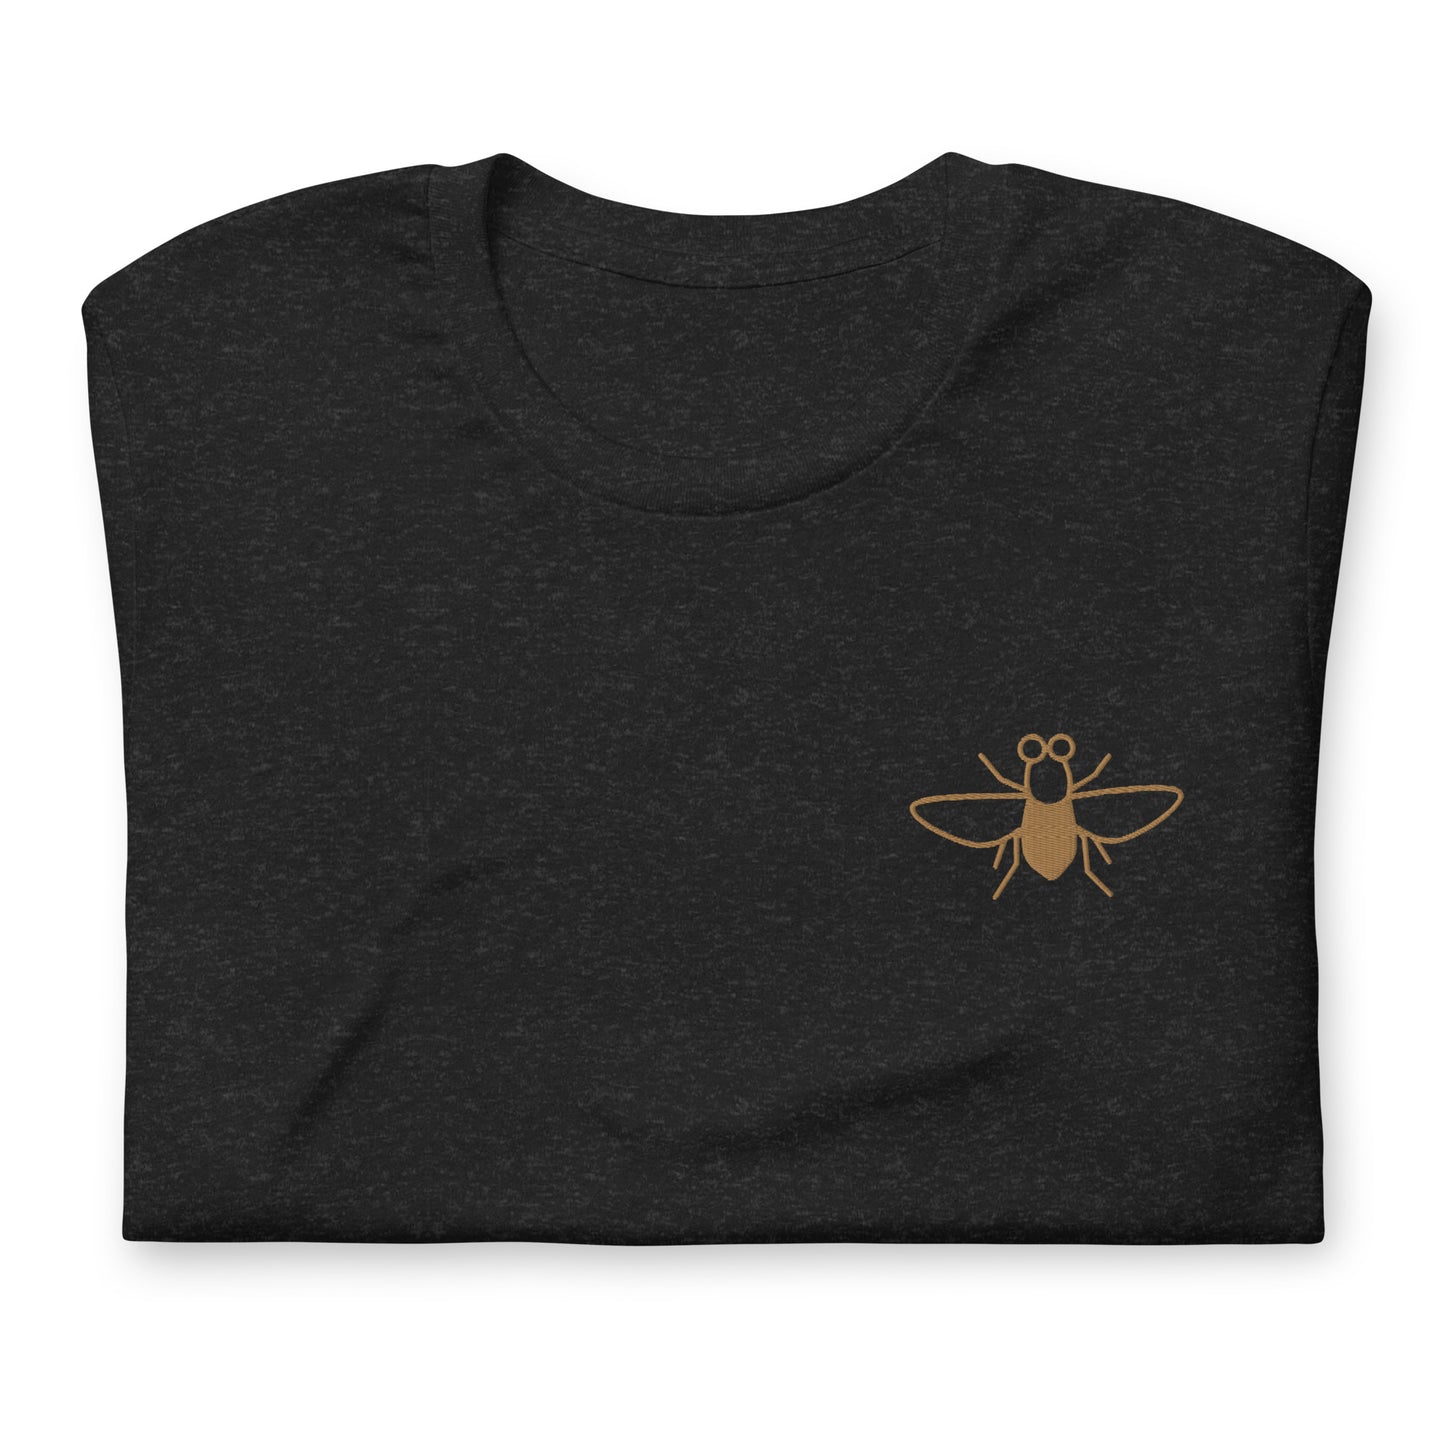 Limited Edition Black Fly Embroidered Unisex T